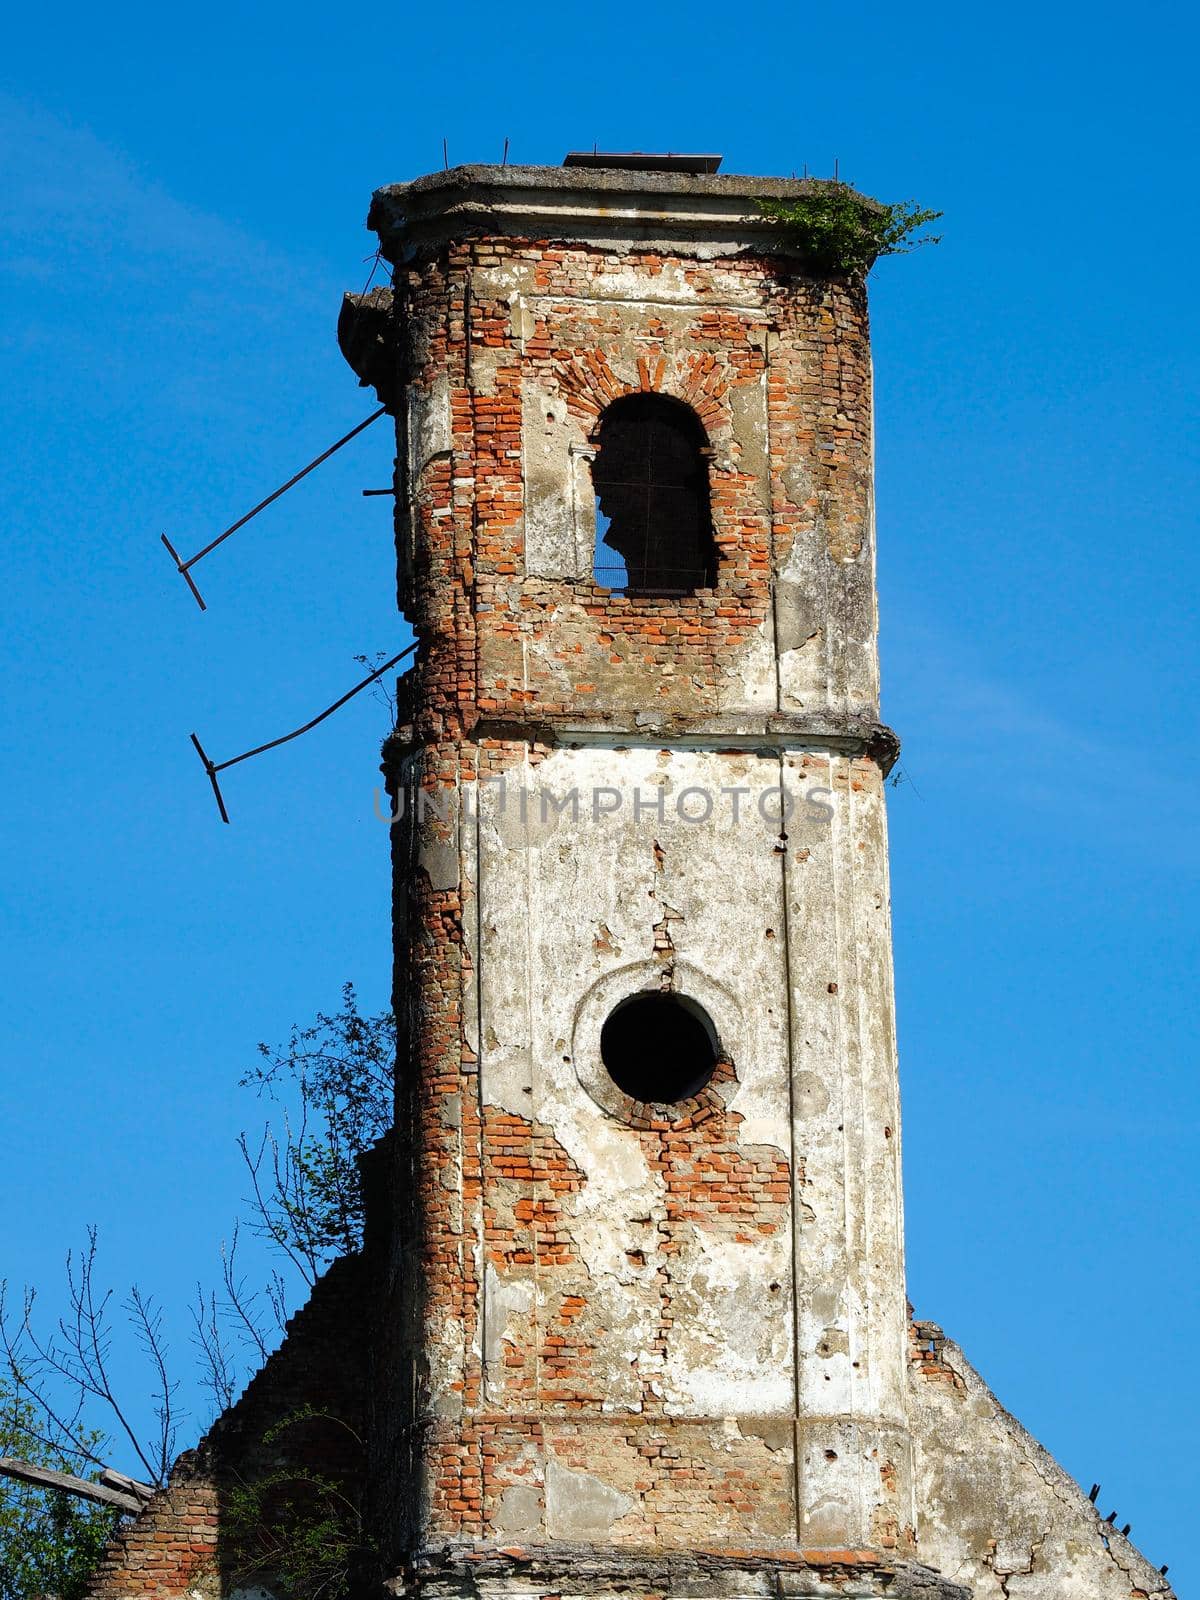 A church in Croatia destroyed by the civil war.